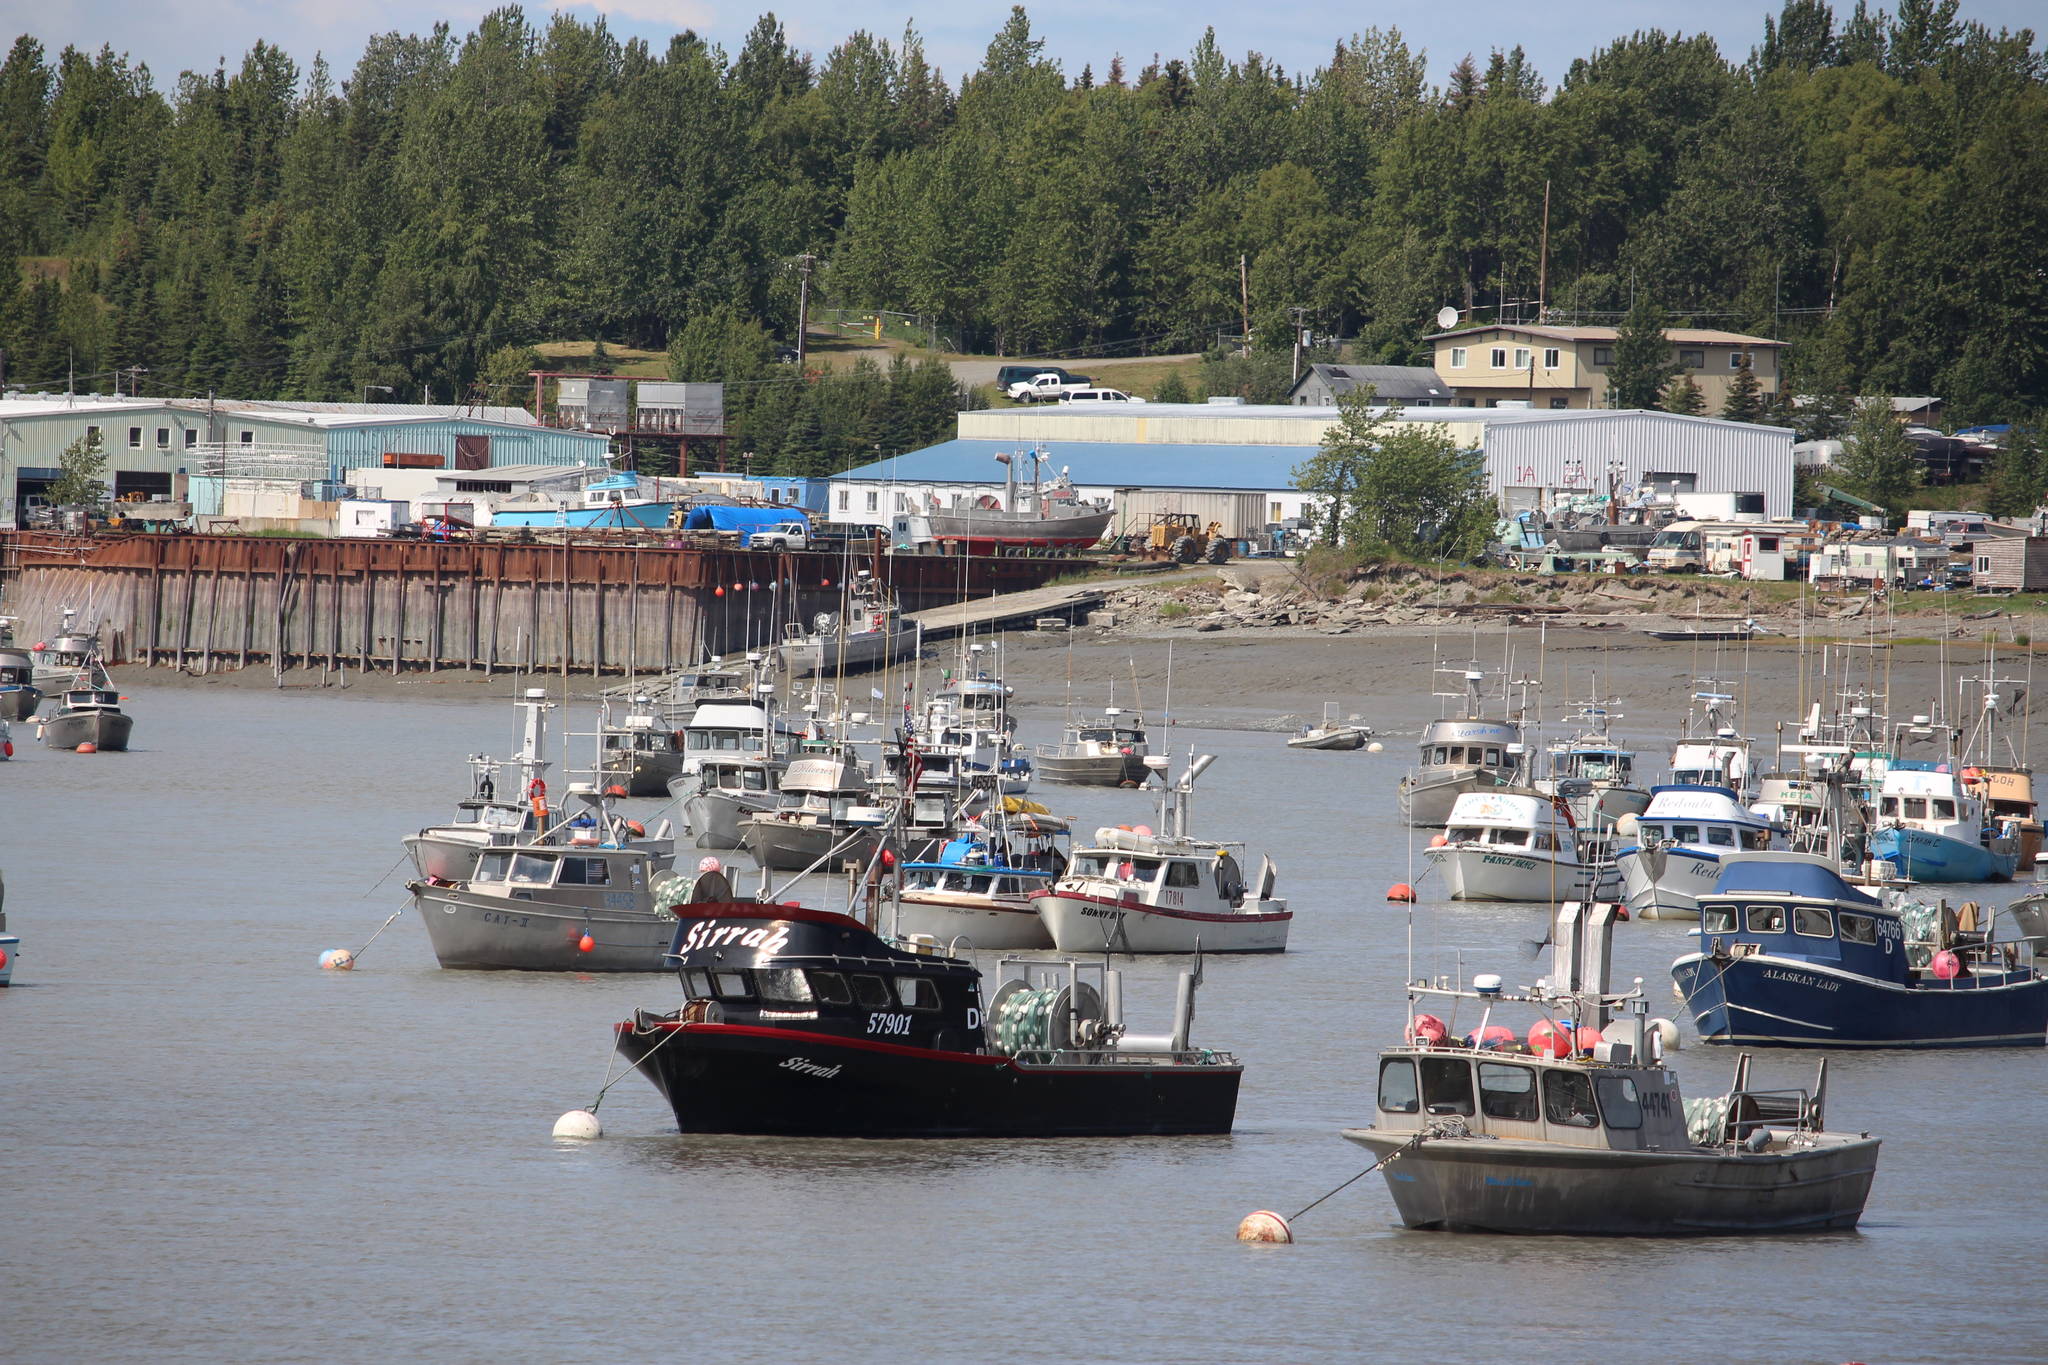 Commercial fishing vessels are moored at the mouth of the Kenai River on July 10, 2020. (Photo by Brian Mazurek/Peninsula Clarion)